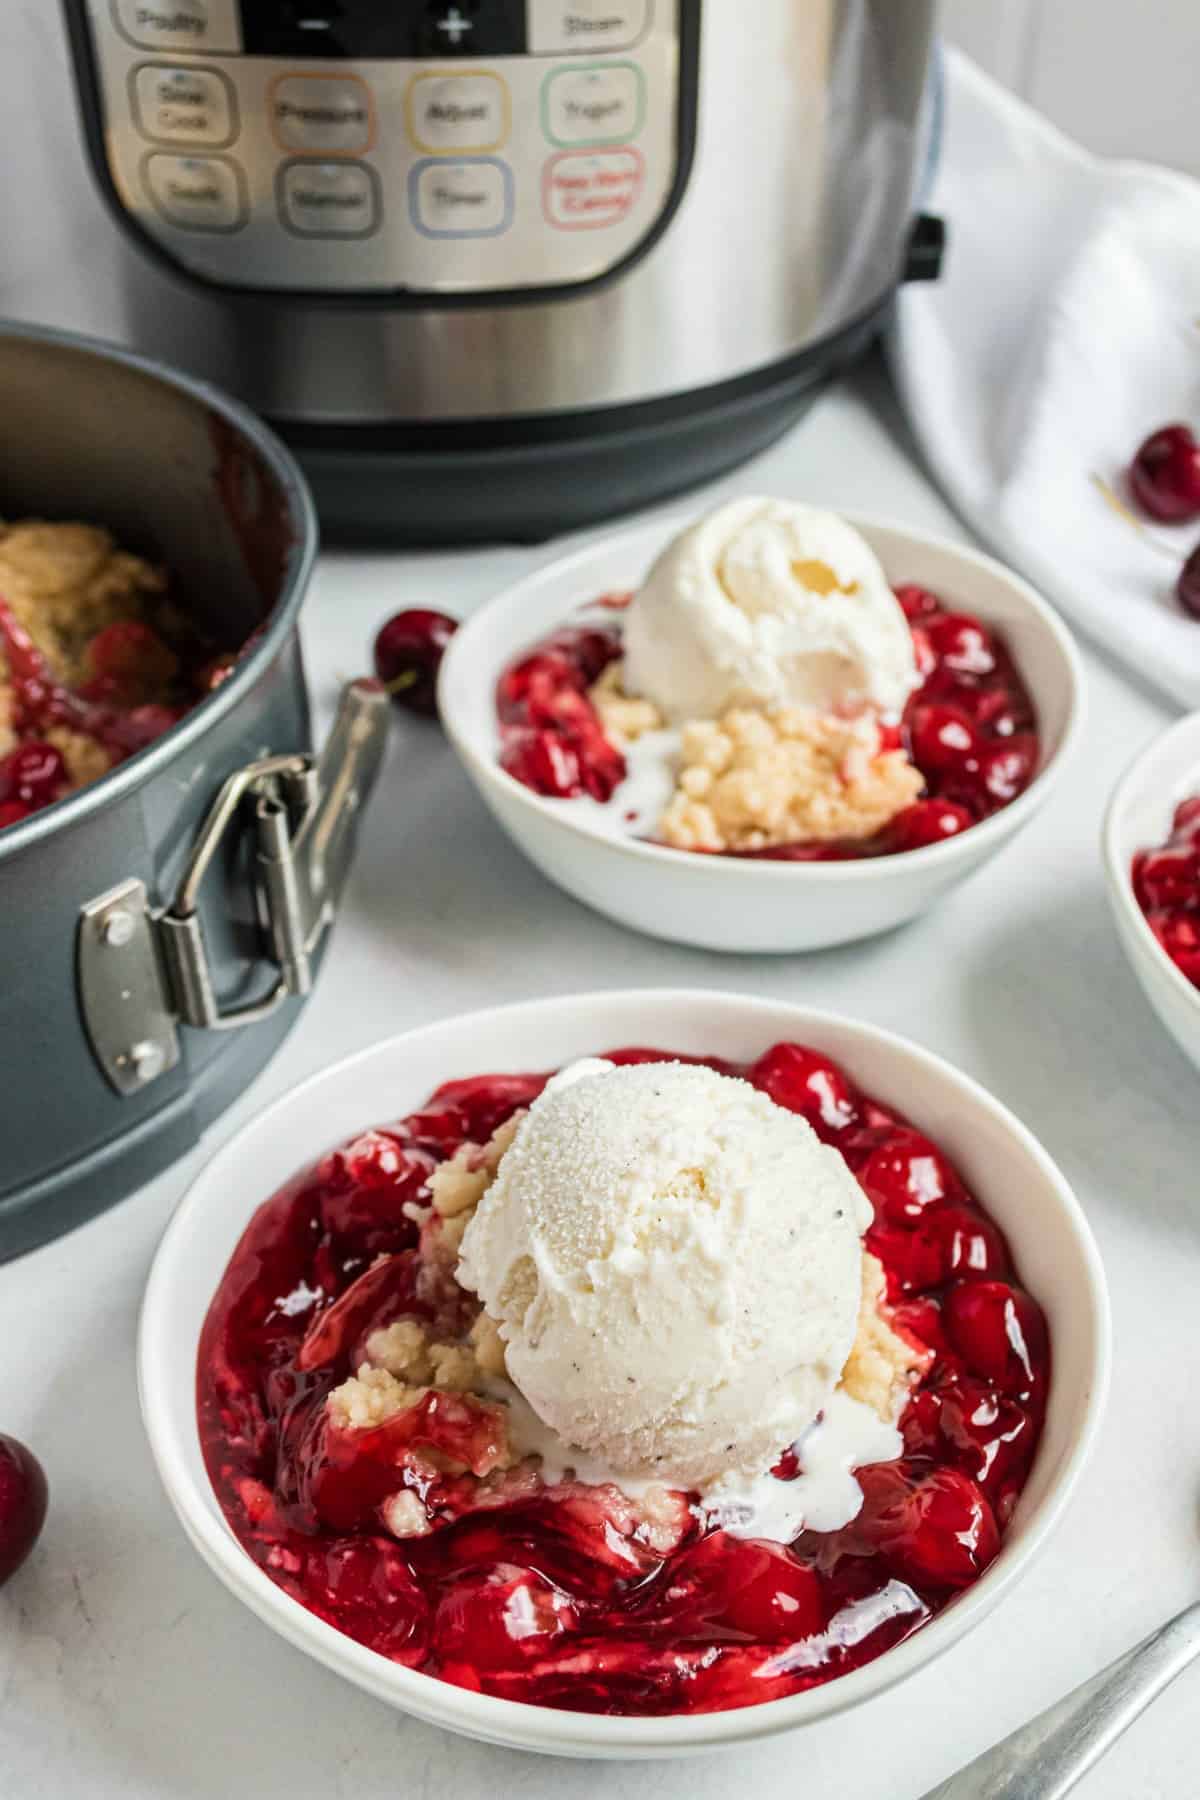 Cherry cobbler topped with vanilla ice cream in a white bowl.